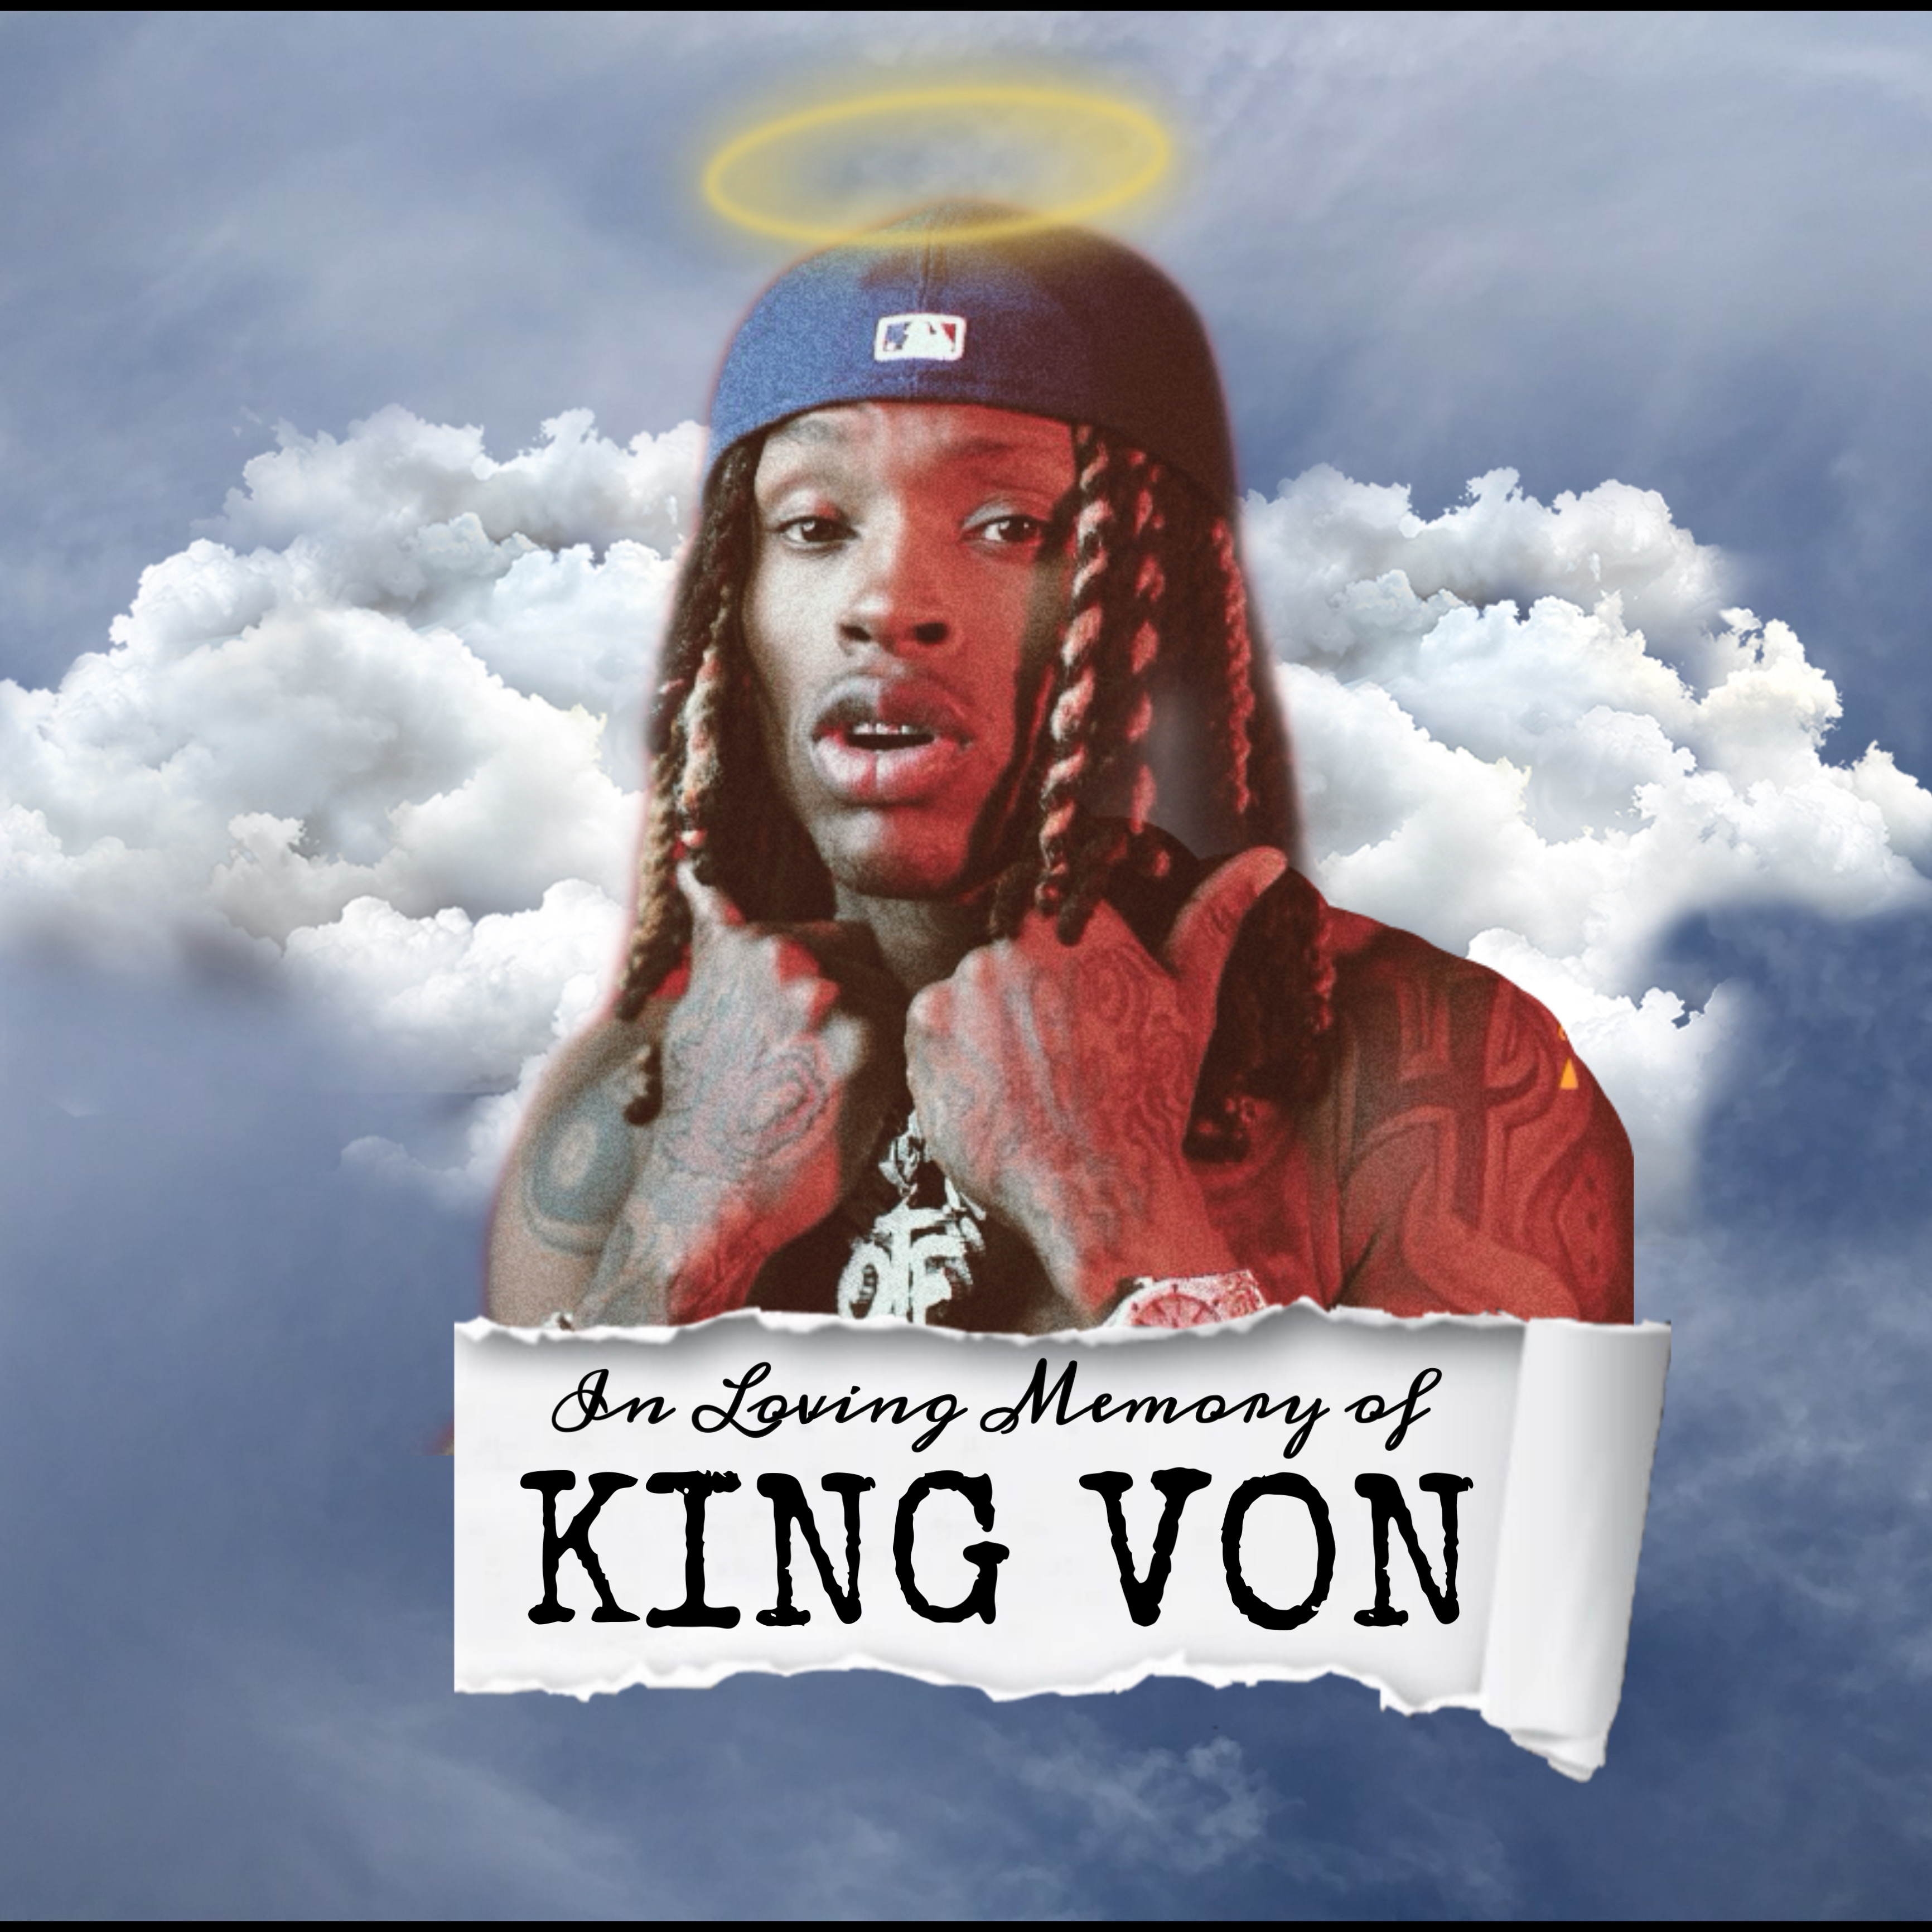 Stream Octavia  RIP King Von music  Listen to songs albums  playlists for free on SoundCloud